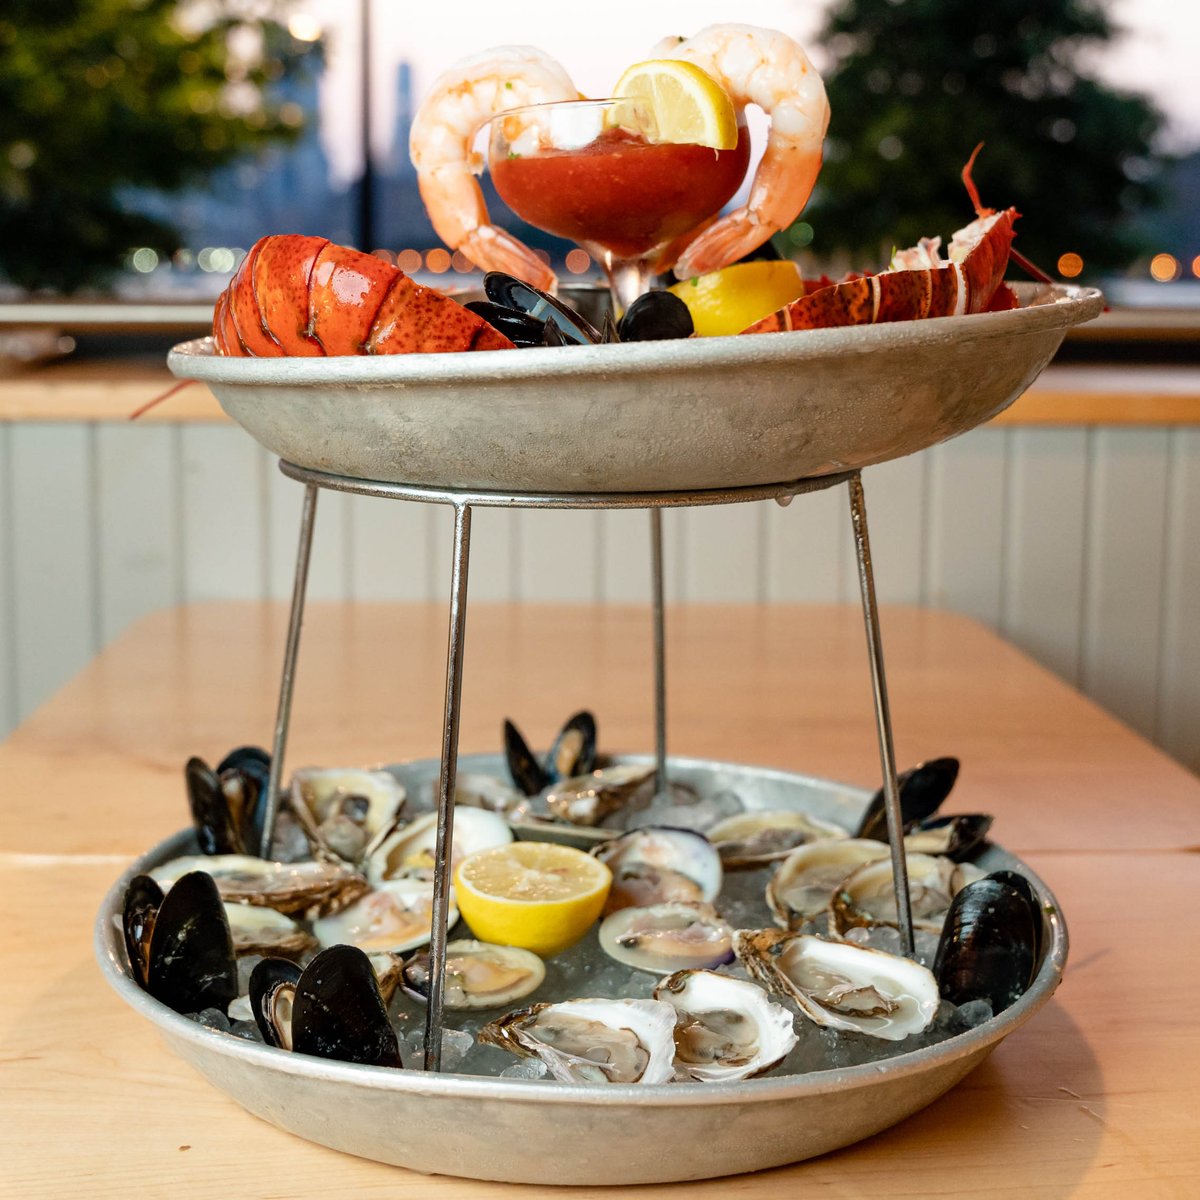 PSA: If you haven't tried our Seafood Tower yet, you're 100% missing out. #SeawolfBK 

#Oyster #oysters #nycrestaurantreview #nycrestaurant #nycrestaurants #seafood #seafoodies #nycfoodies #nycfood #SeafoodTower #lobster #lobsterlover #lobsterlovers #lobsta